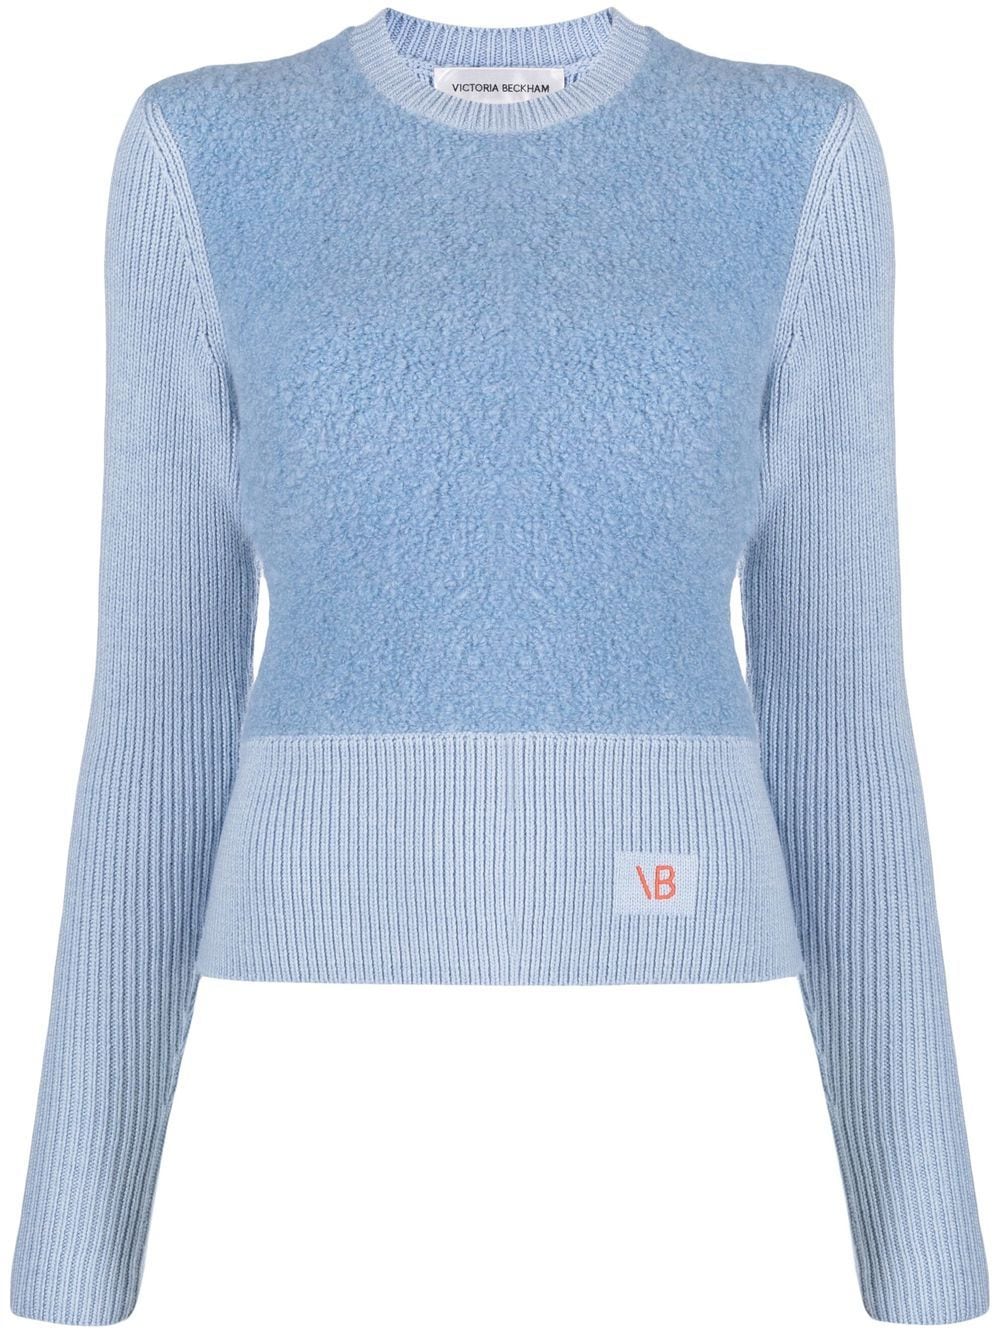 Victoria Beckham two-tone long-sleeved Jumper - Farfetch